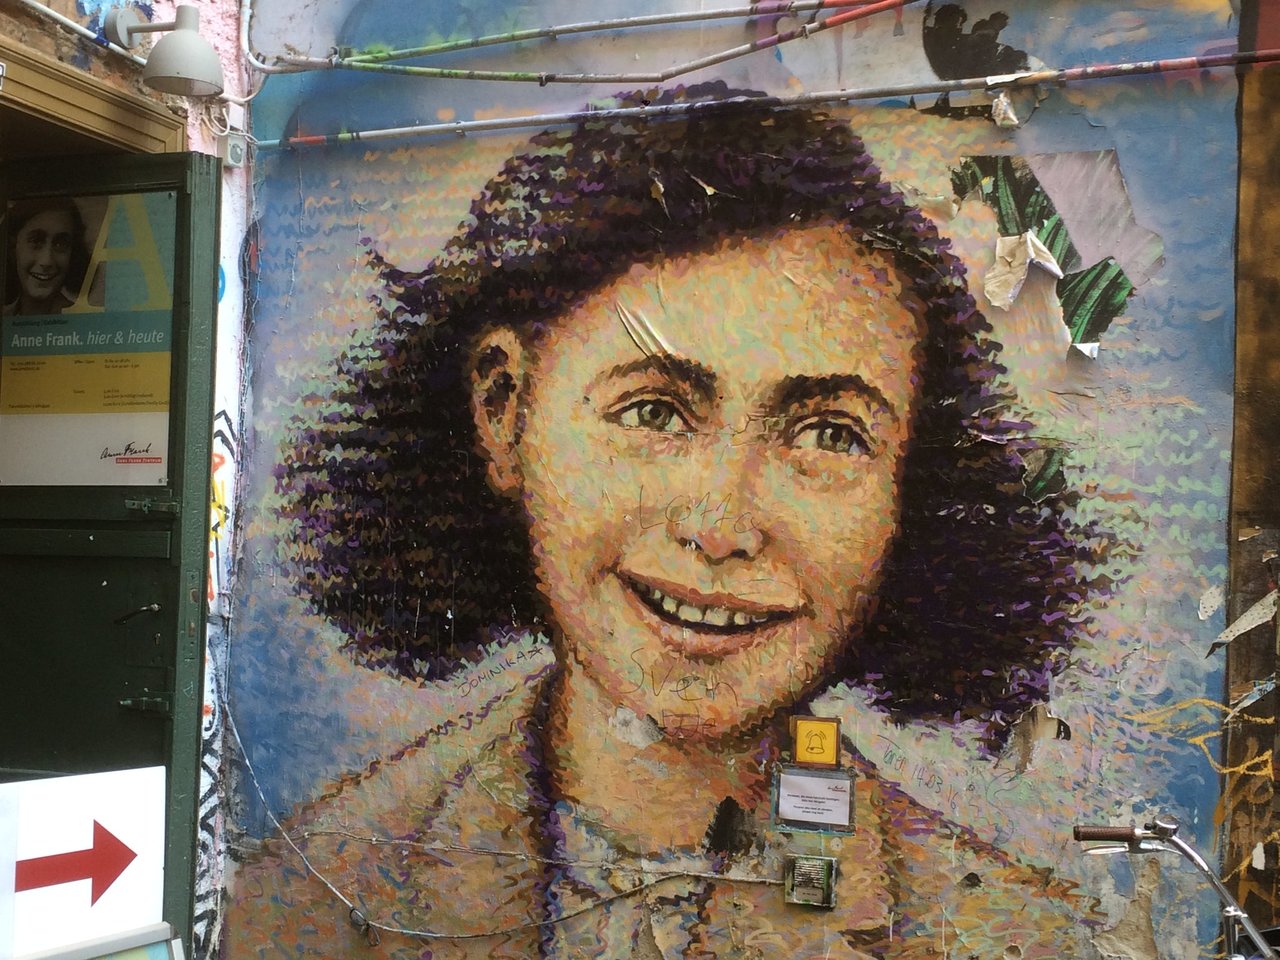 Anne Frank by Jimmy C in Berlin #streetart #berlin More about his artwork here:  http://bit.ly/2hmqCwi https://t.co/8XWnWVfLA9